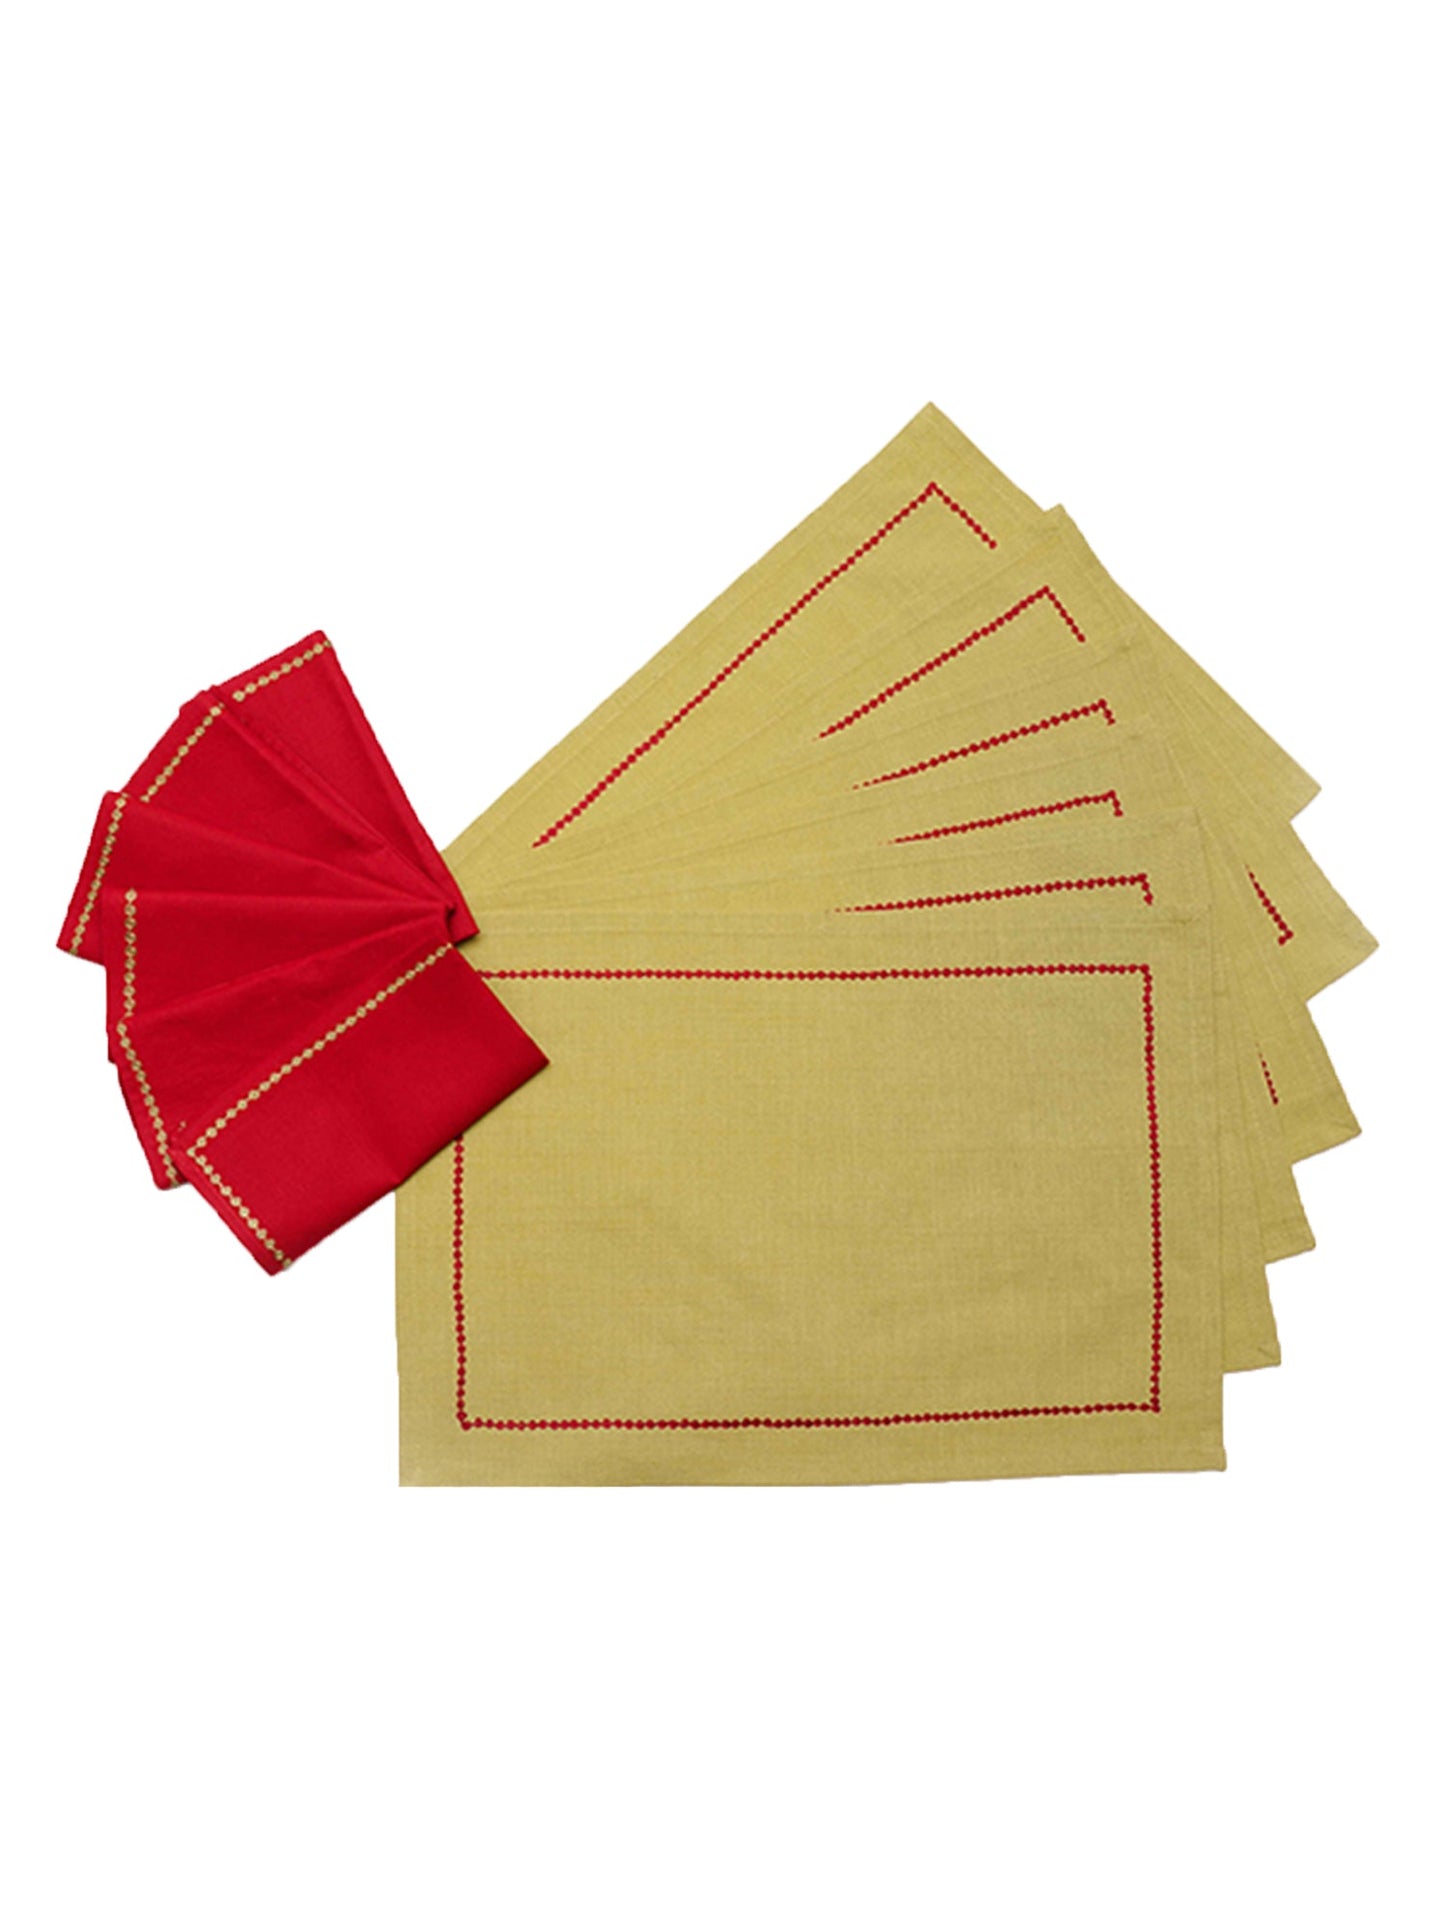 Table Mats and Napkins  100% Cotton Embroidered Green and Red - 13" x 19" ; 16" x 16" - Set of 6